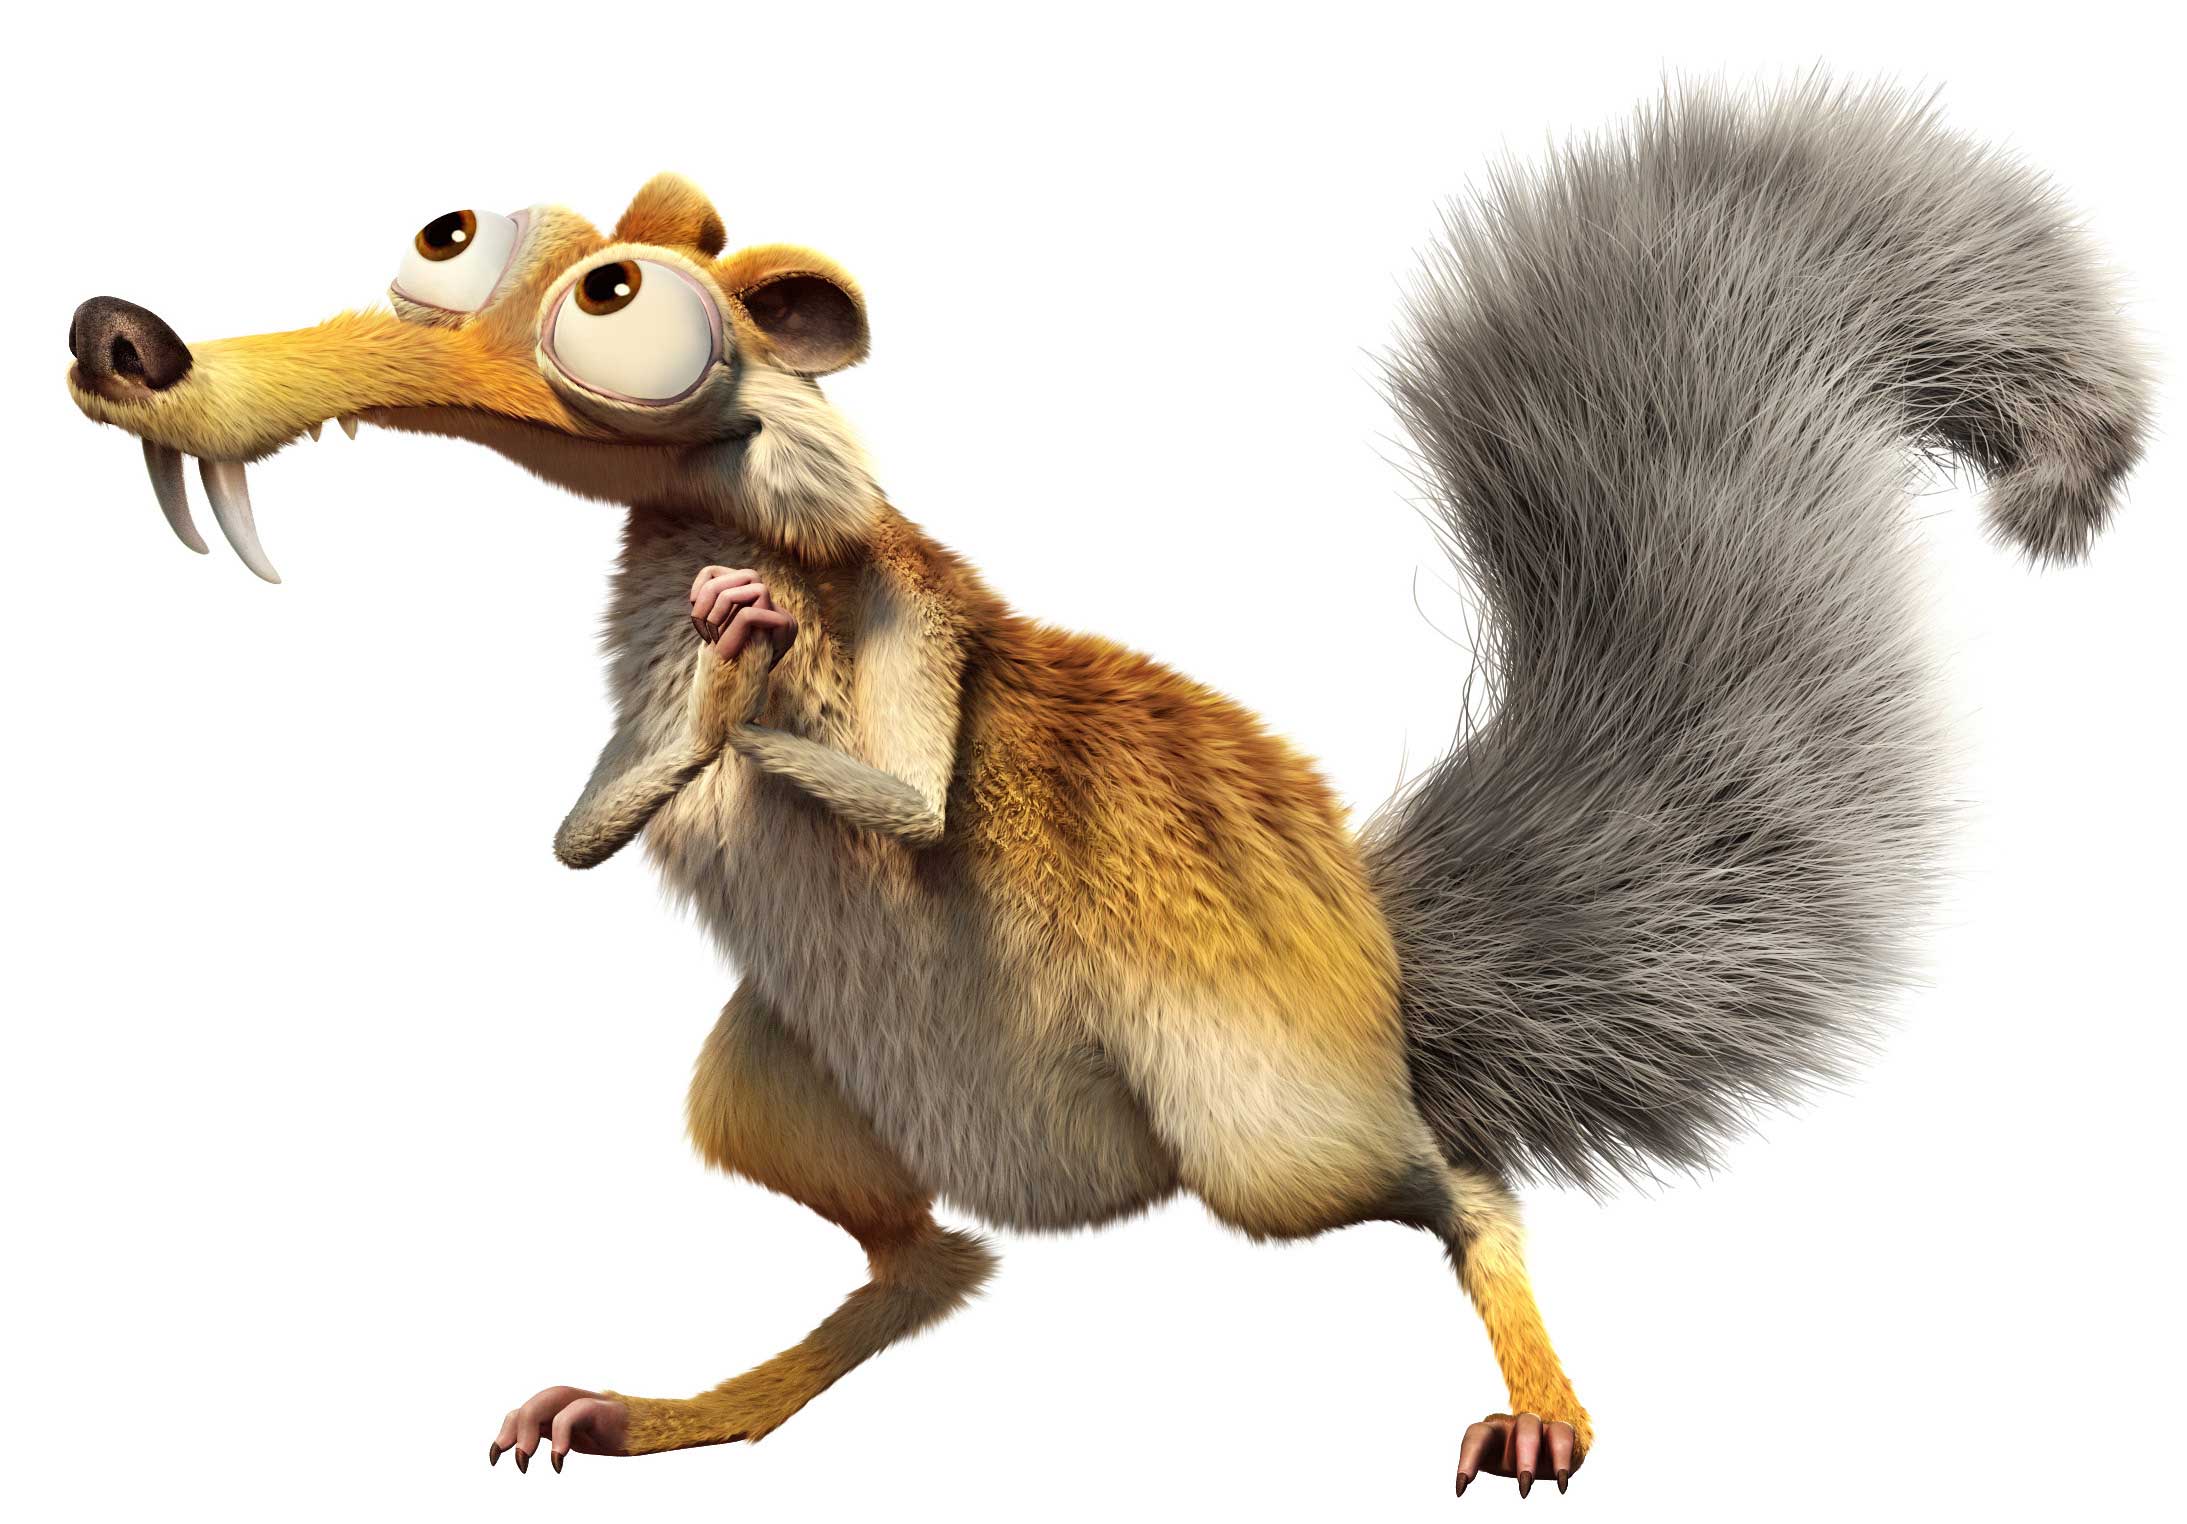 Scrat from Ice Age, ™ & ©2010 Twentieth Century Fox Film Corporation. All Rights Reserved. Rockwell Museum Home for American Illustration